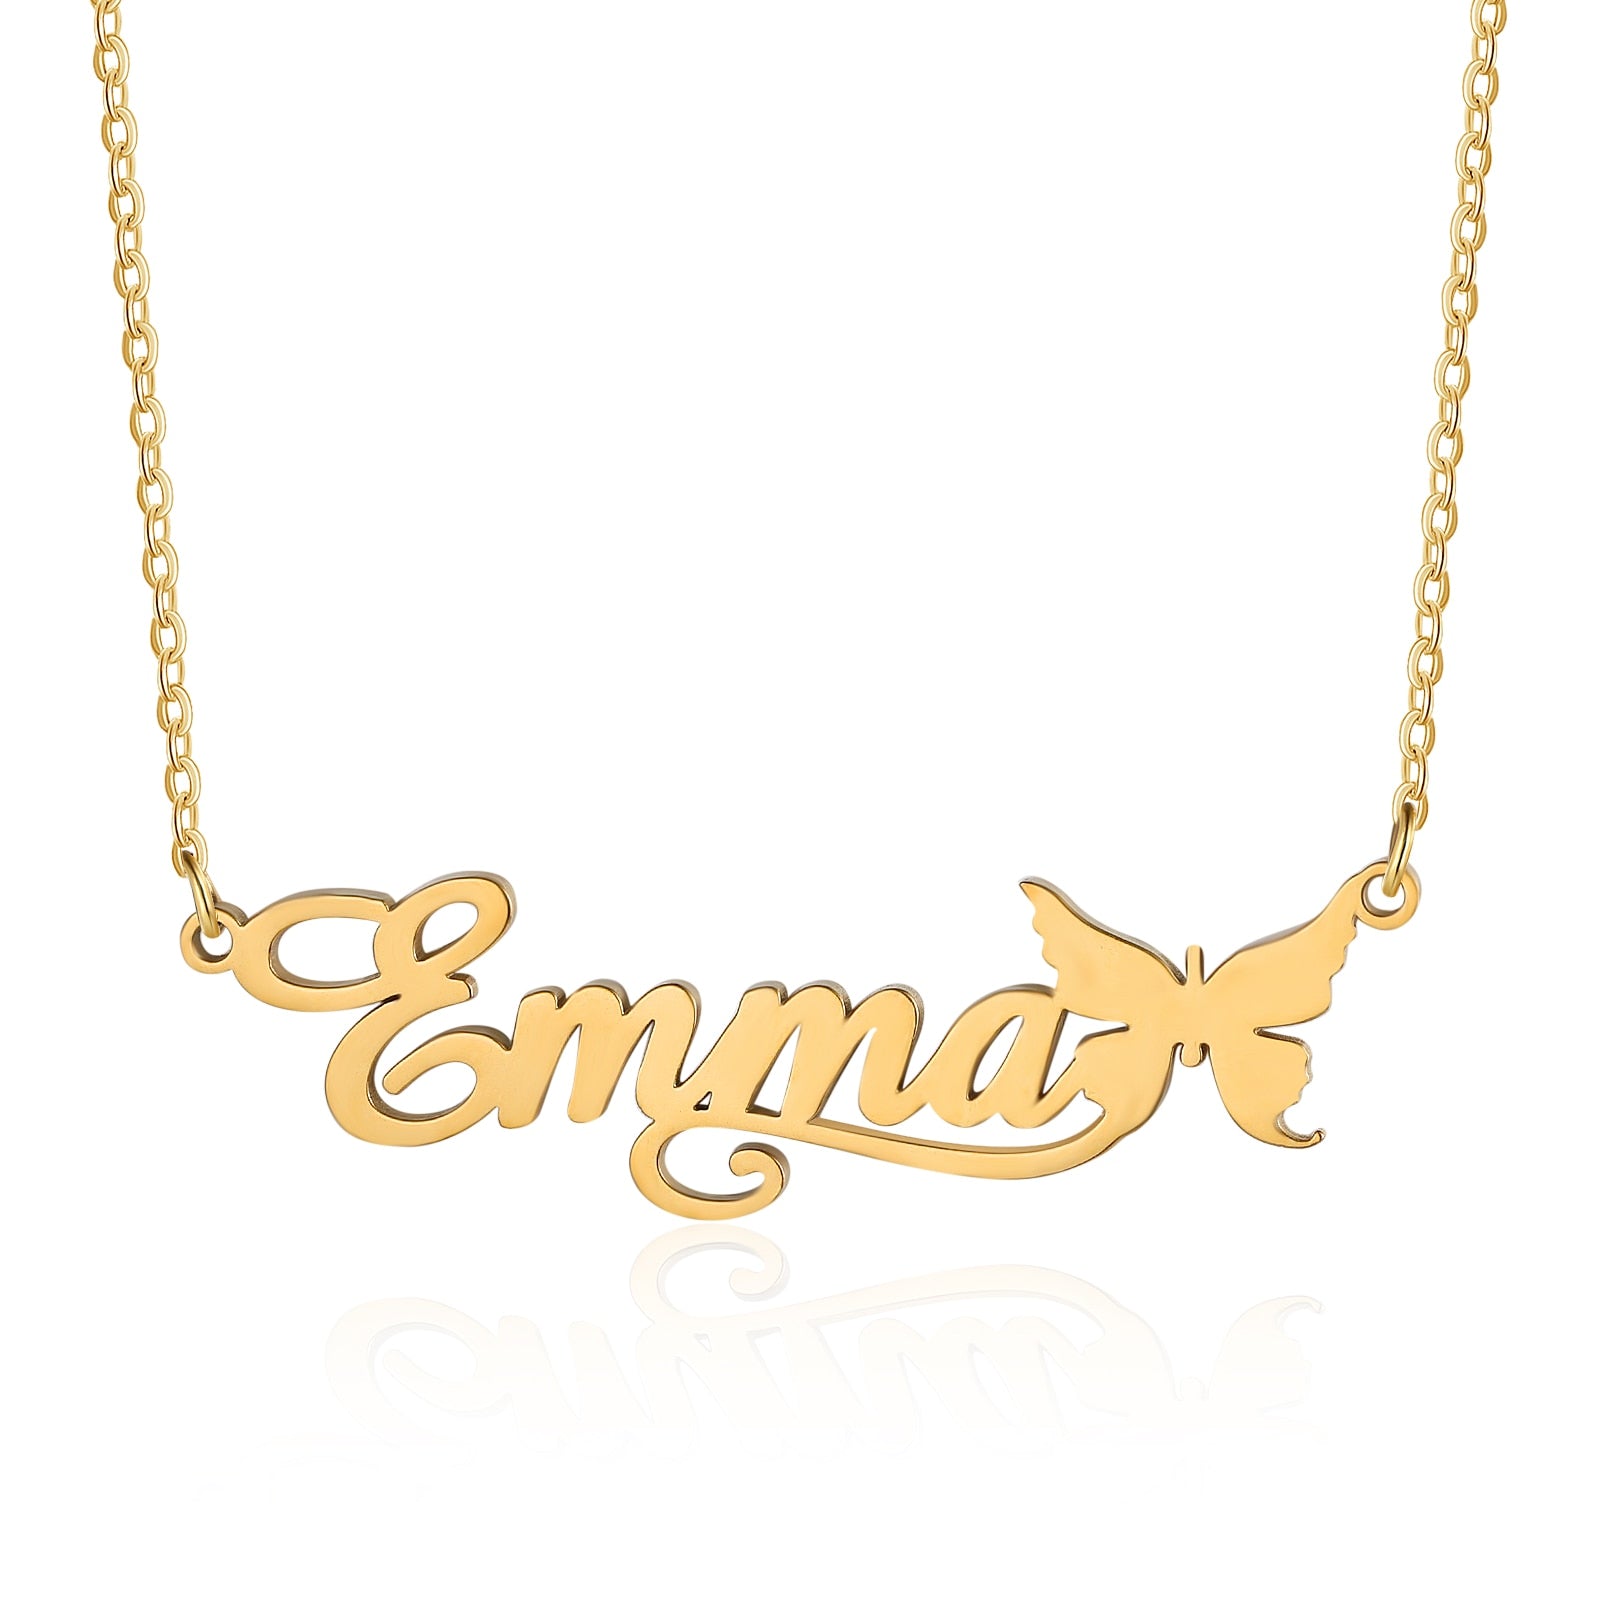 Personalized Nameplate & Butterfly 925 Sterling Silver or Stainless Steel Necklace (3 Colors)